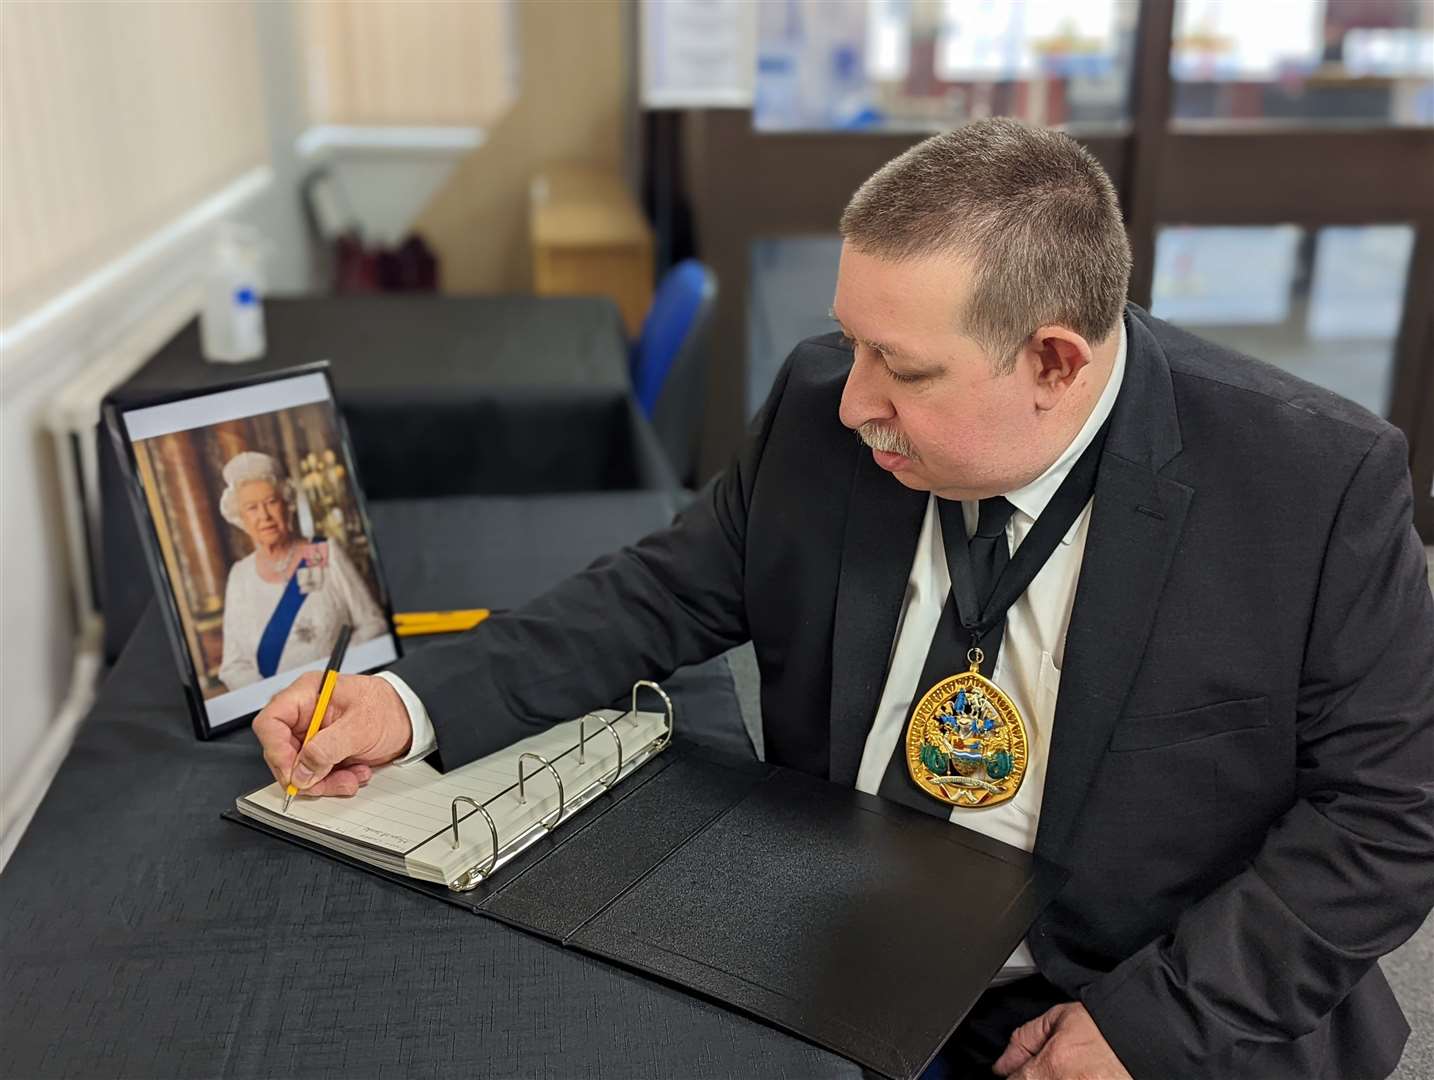 Mayor of Swale Cllr Simon Clark signs a book of condolence at Swale House. Picture: Swale council